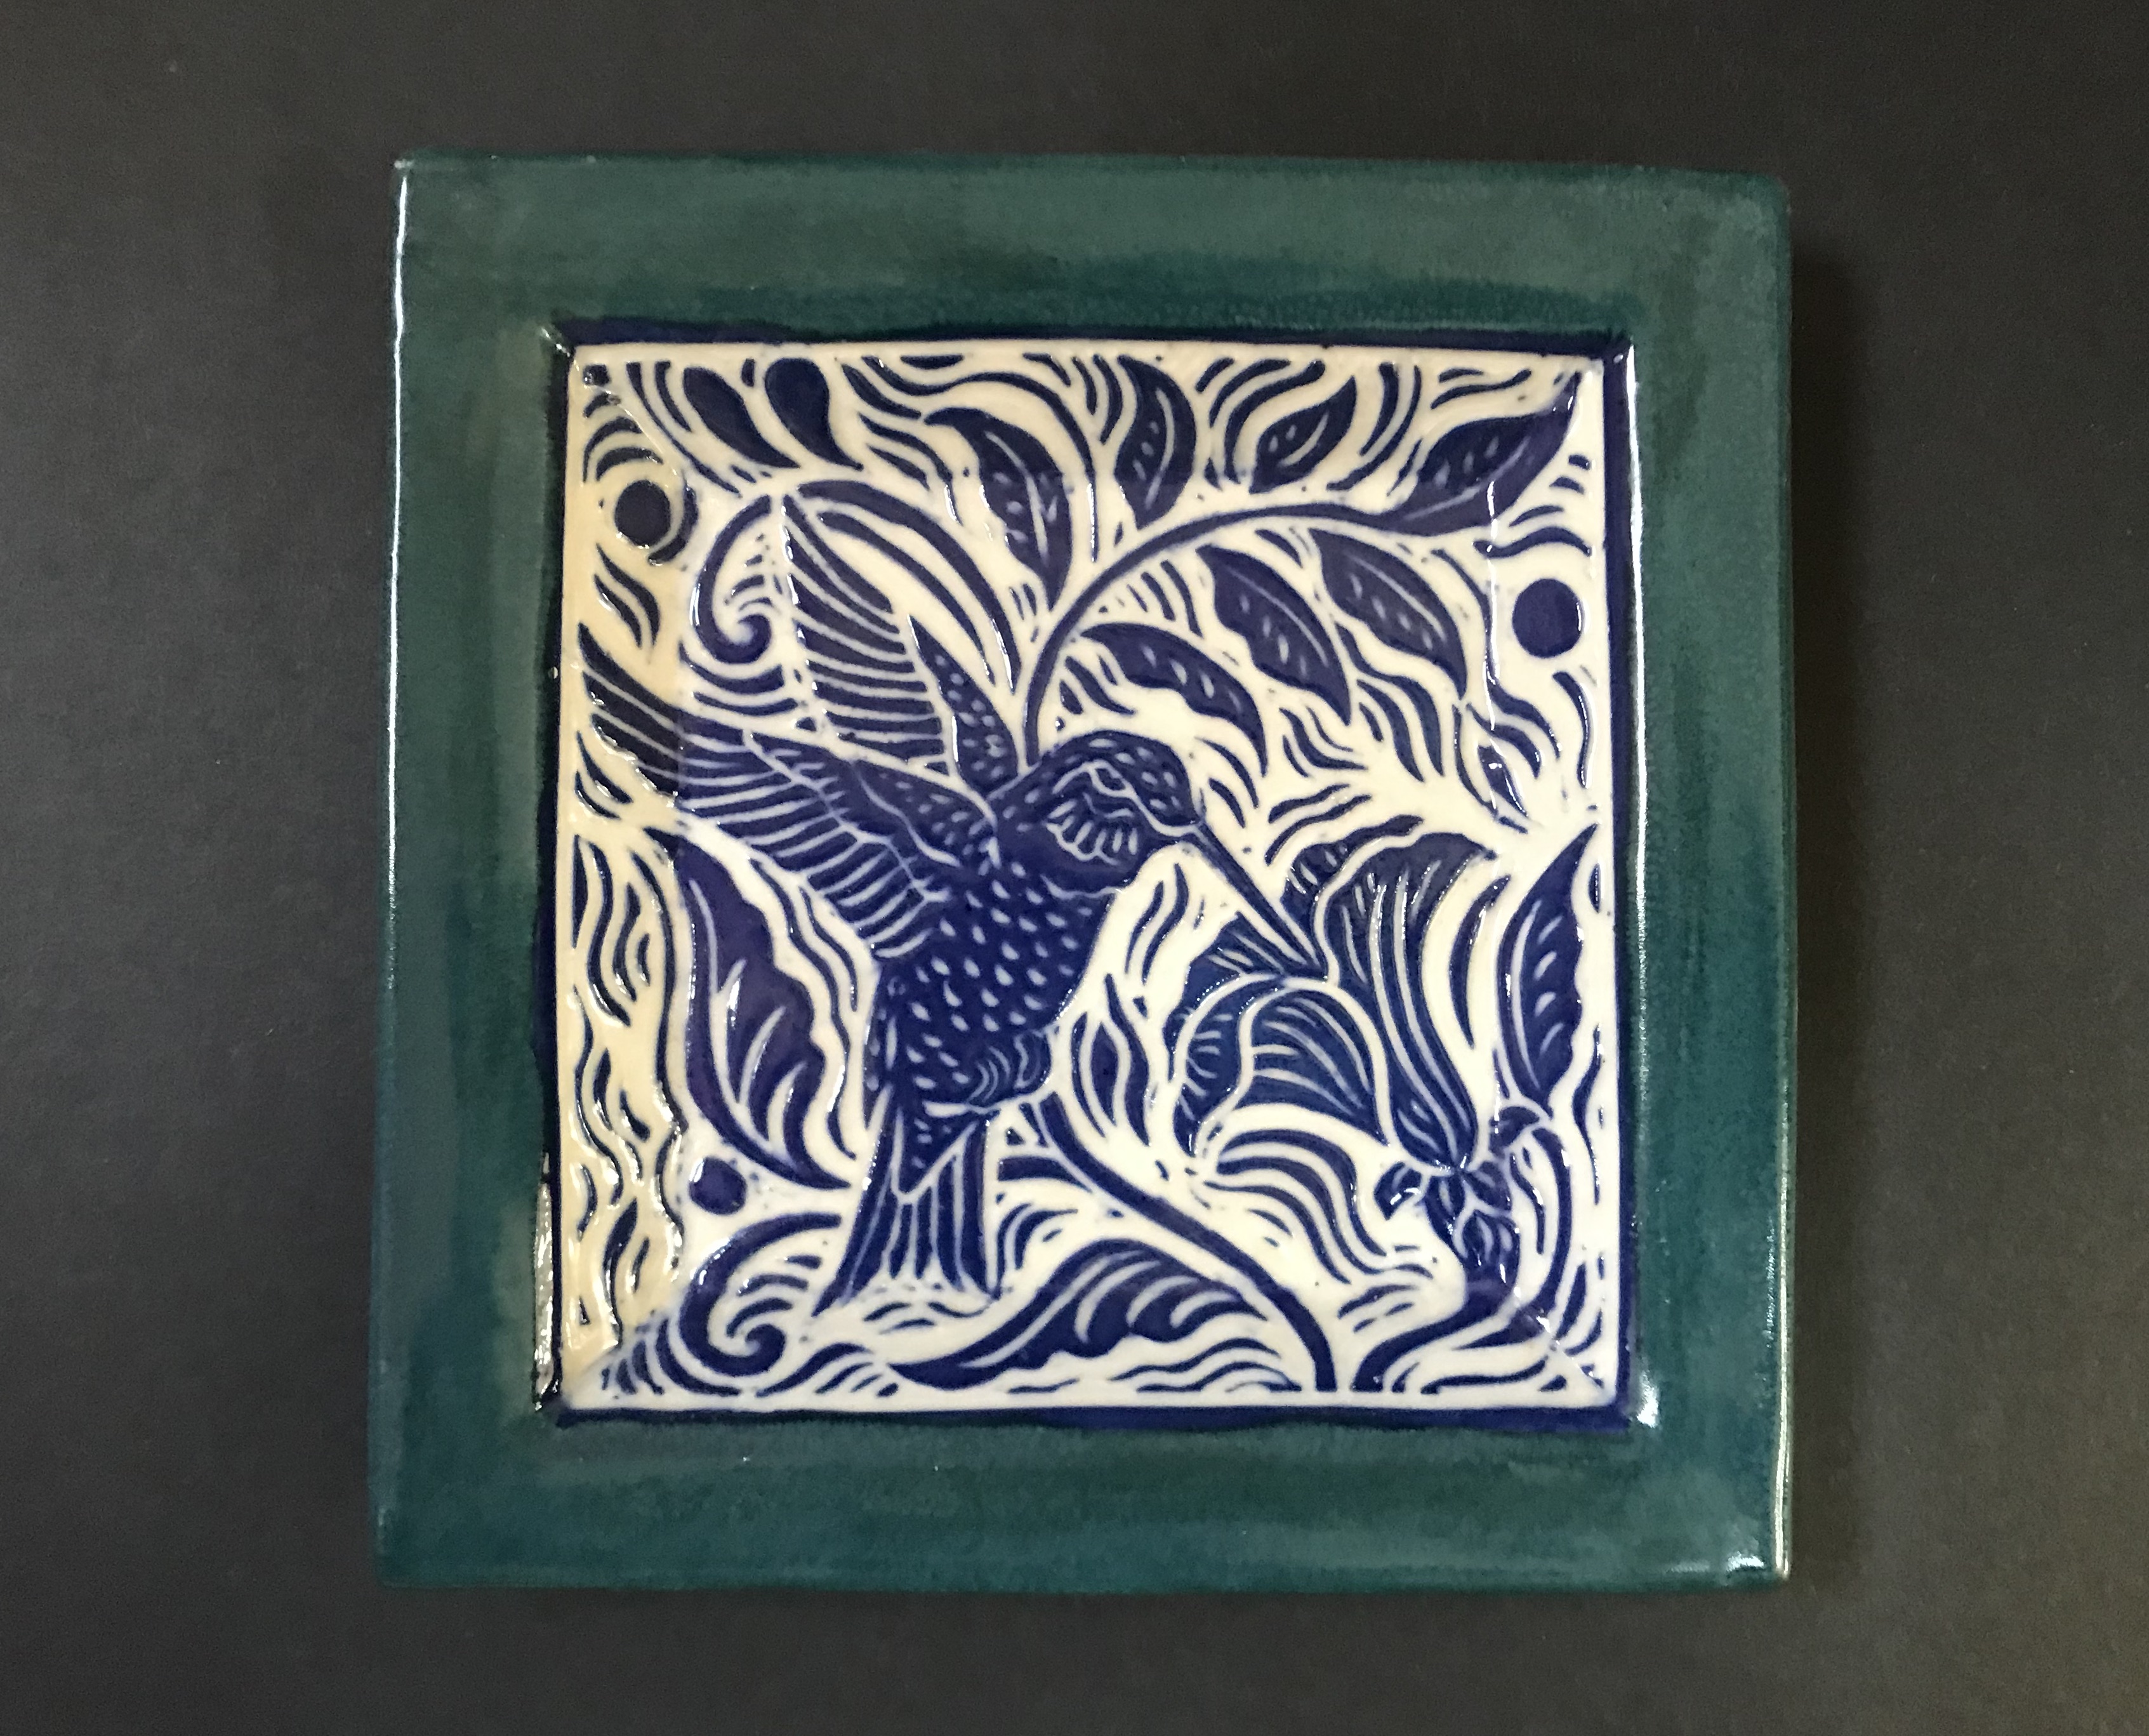 Ceramic Square Dish in Cobalt Blue, White, and Turquoise with Stylized Hummingbird Desgin